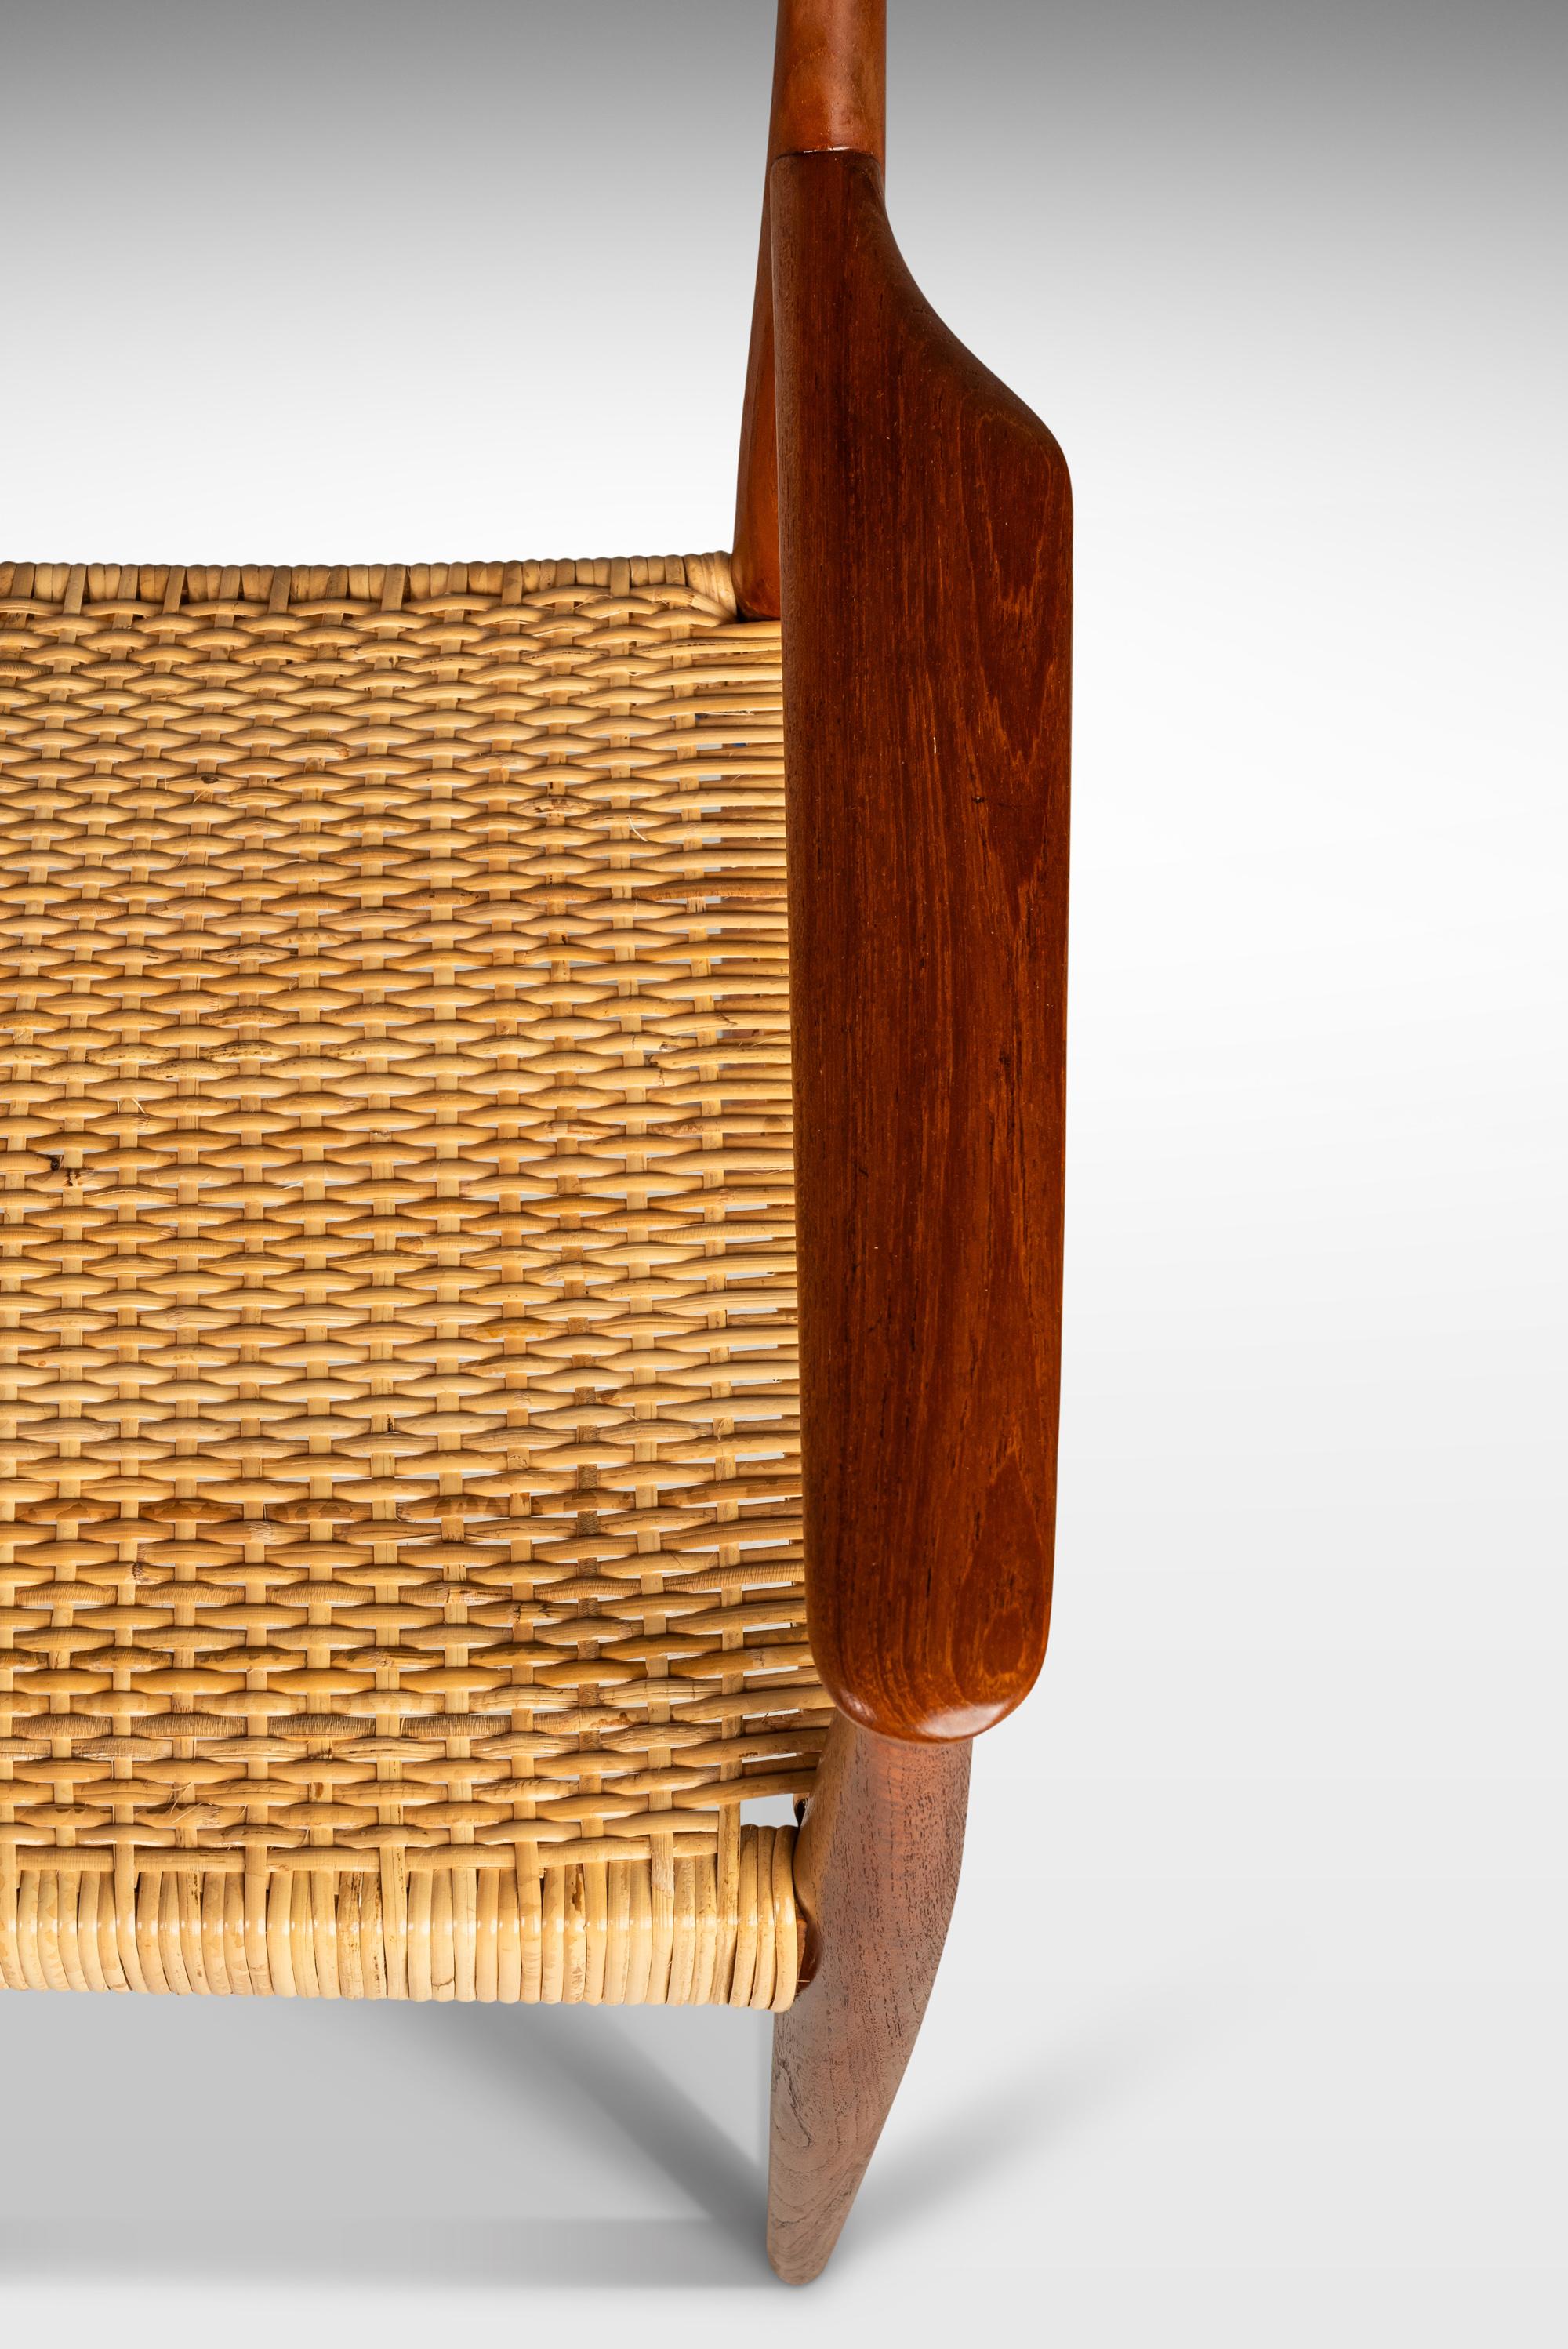 Wicker Set of 2 Danish Modern Arm Chairs by Enjar Larsen & Bender Madsen for Willy Beck For Sale